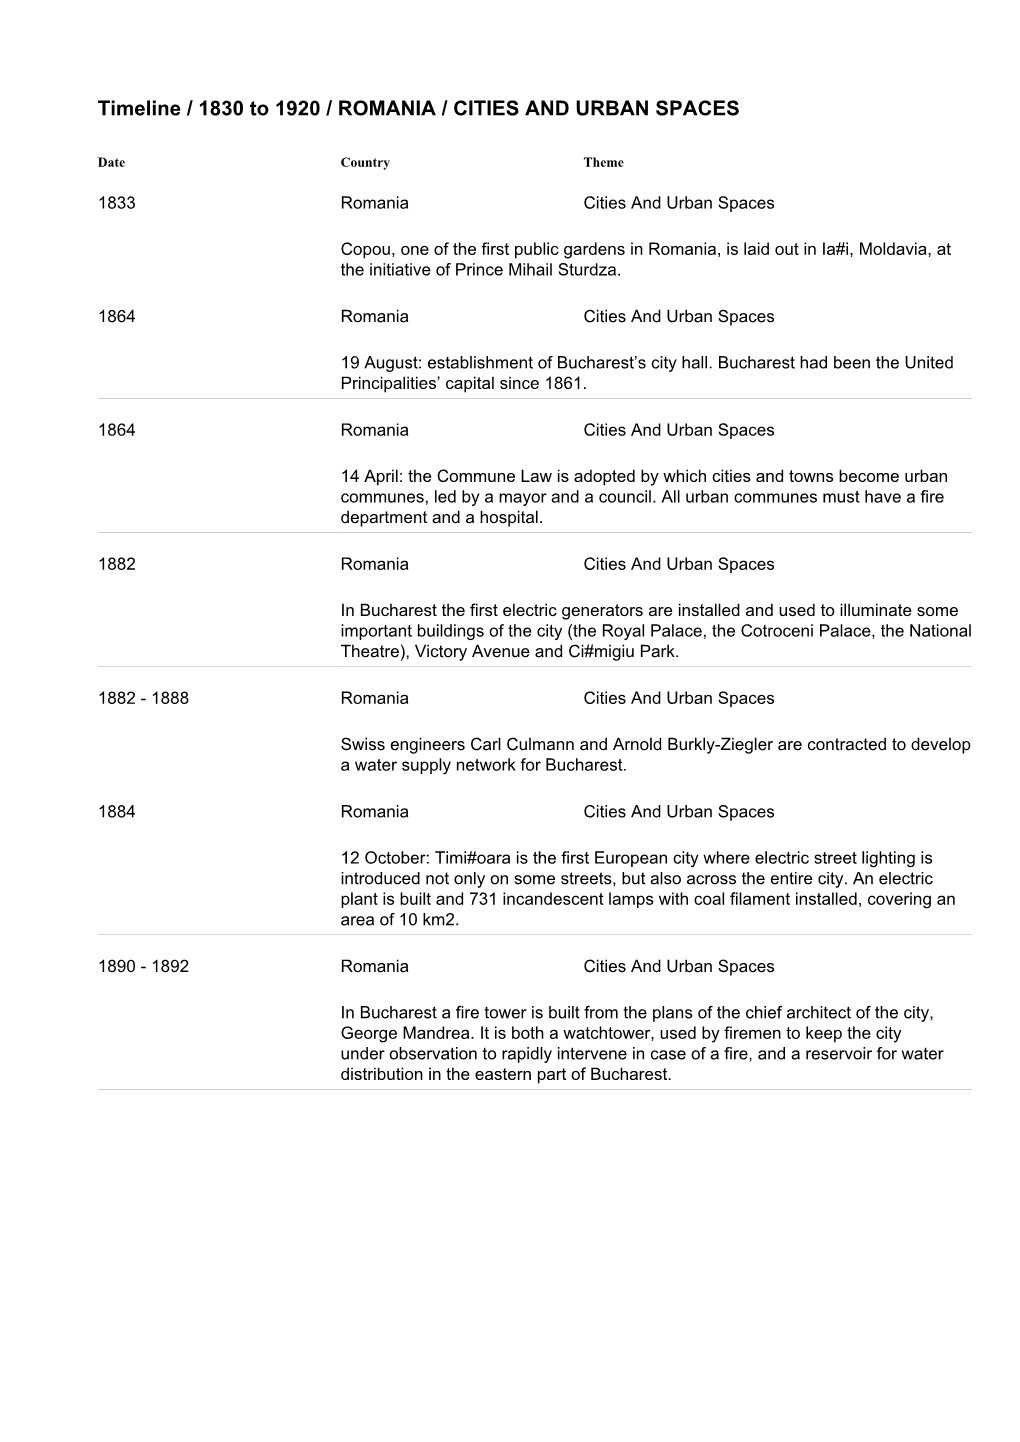 Timeline / 1830 to 1920 / ROMANIA / CITIES and URBAN SPACES